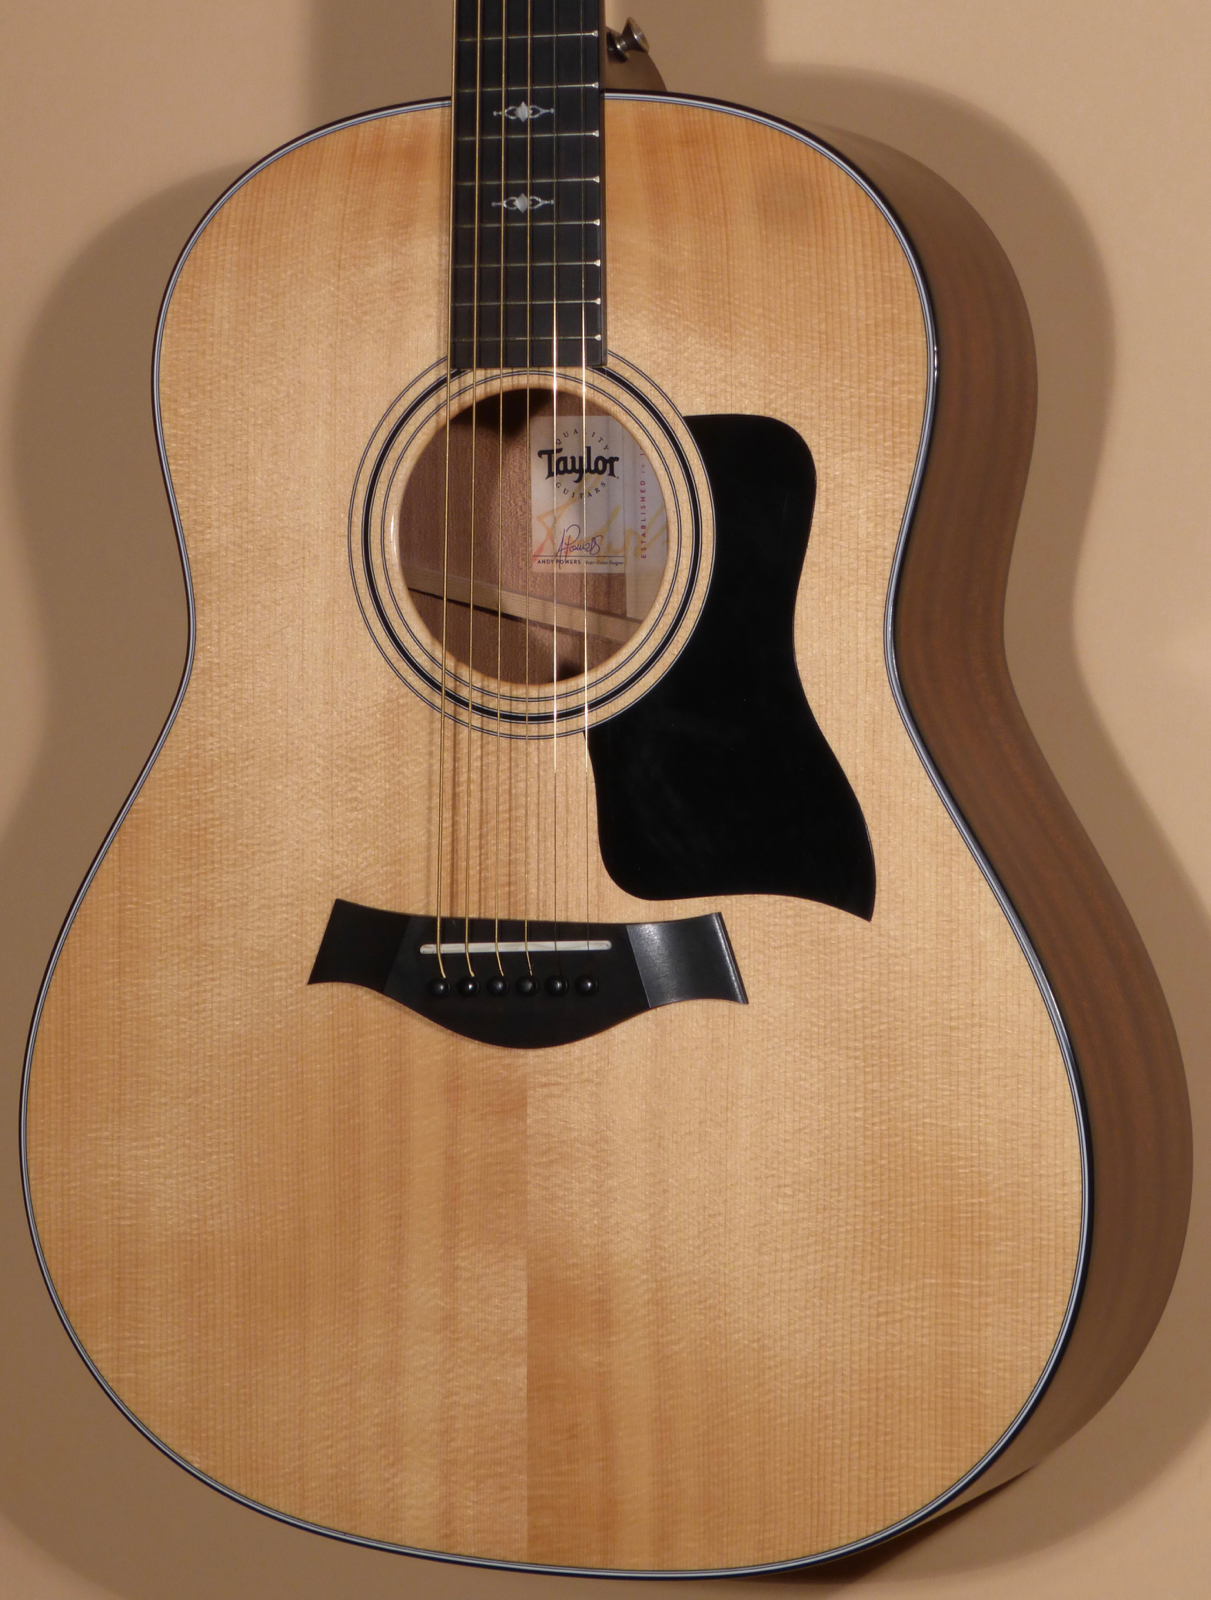 2018 Taylor 317 Grand Pacific Product